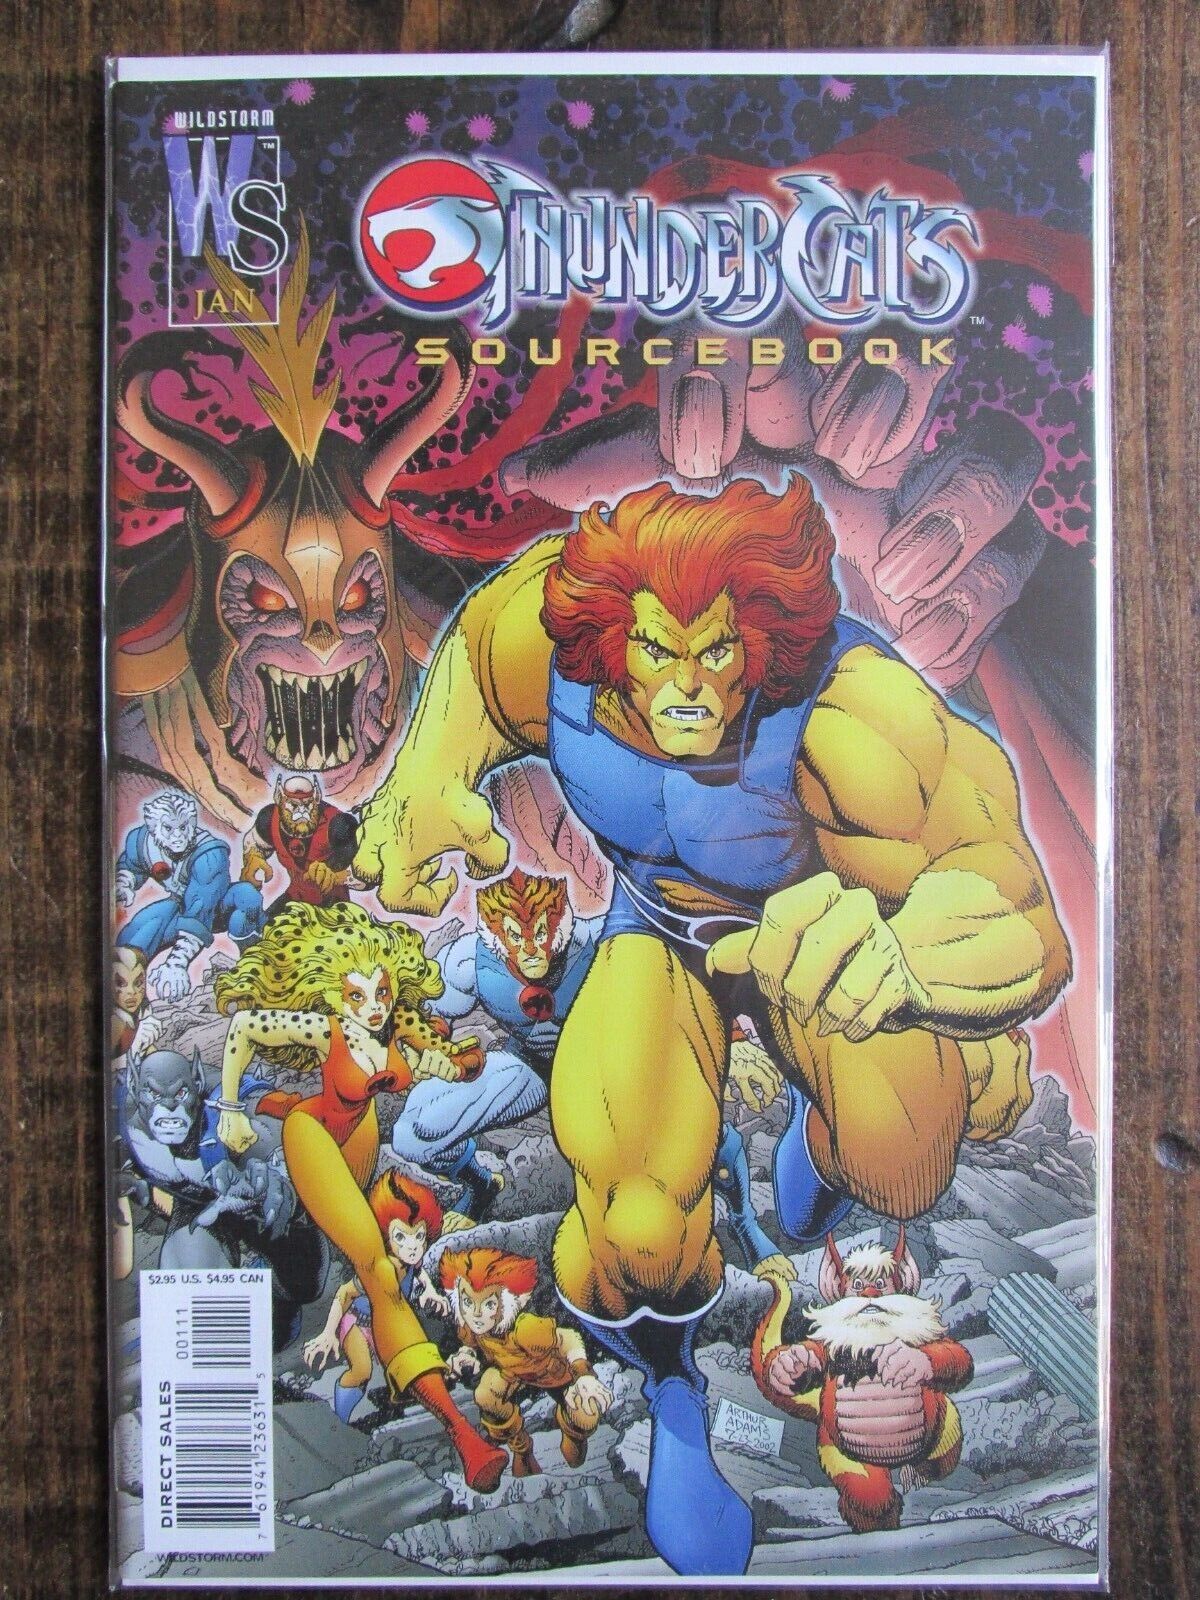 Wildstorm 2003 THUNDERCATS SOURCEBOOK Comic Book Issue # 1 One Shot